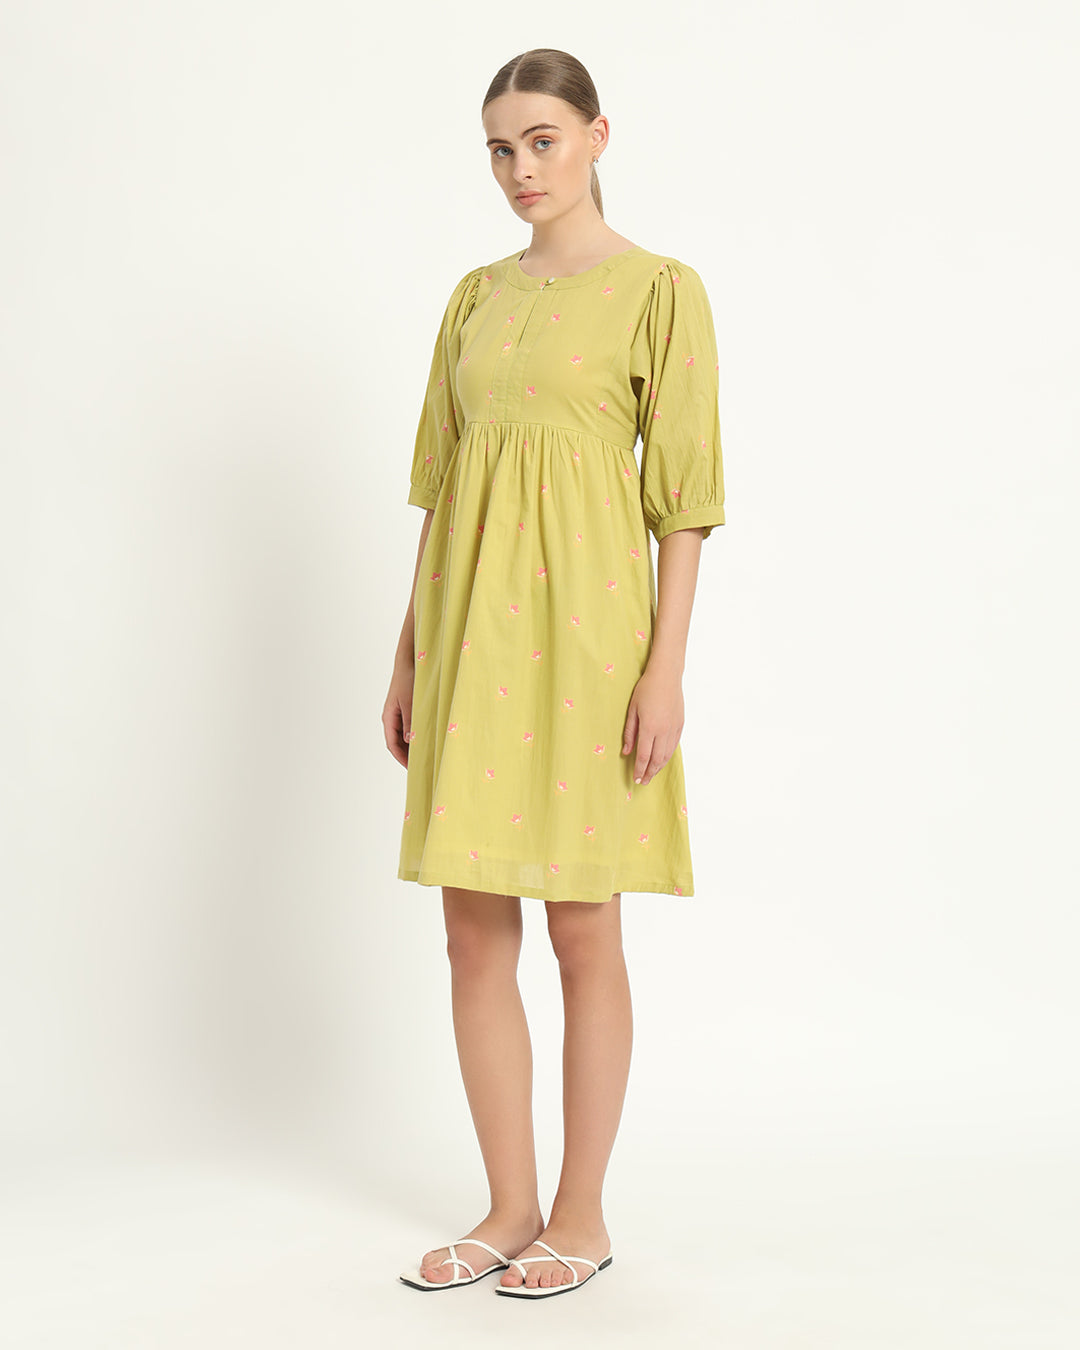 The Aira Lime Cosmos Cotton Dress